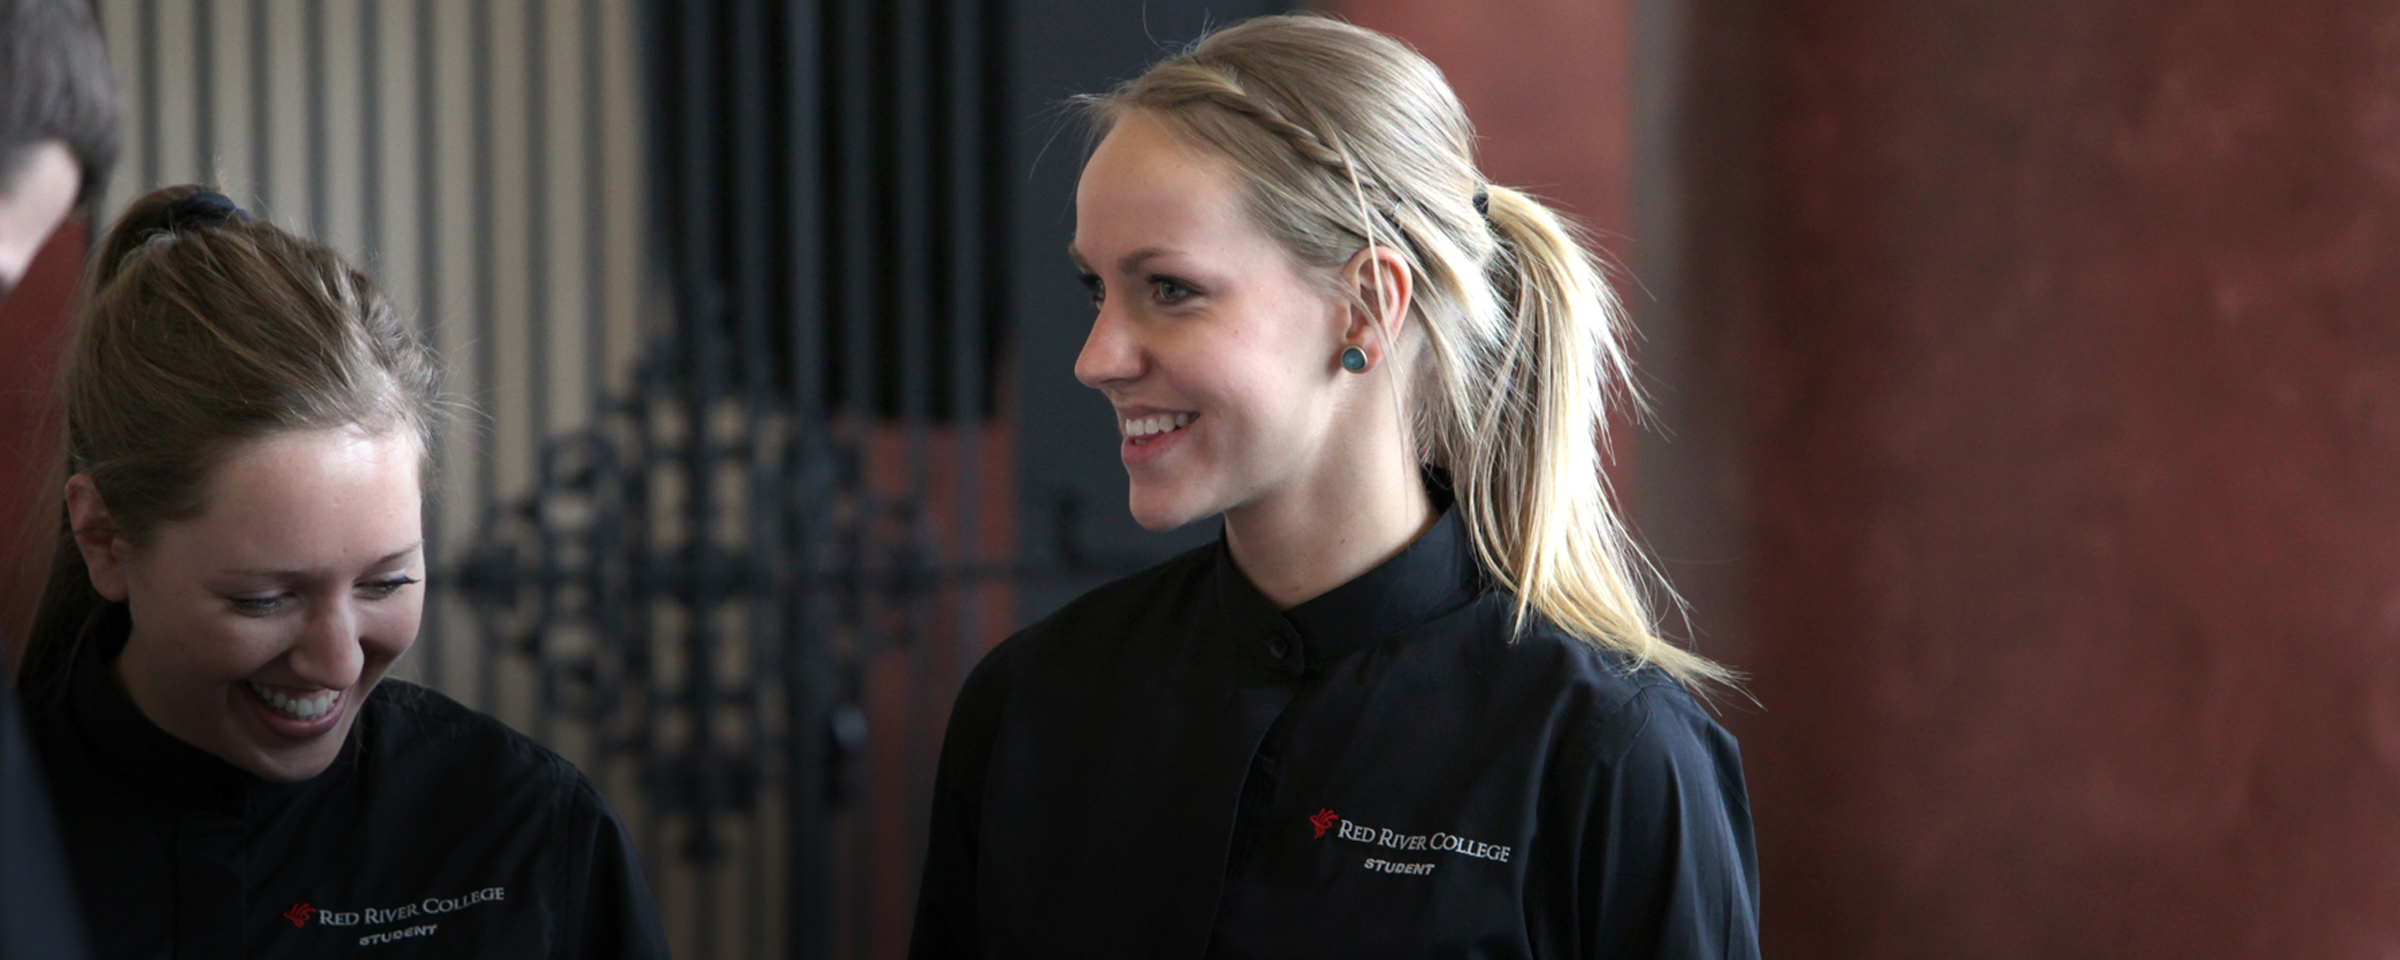 Smiling hostess in a restaurant